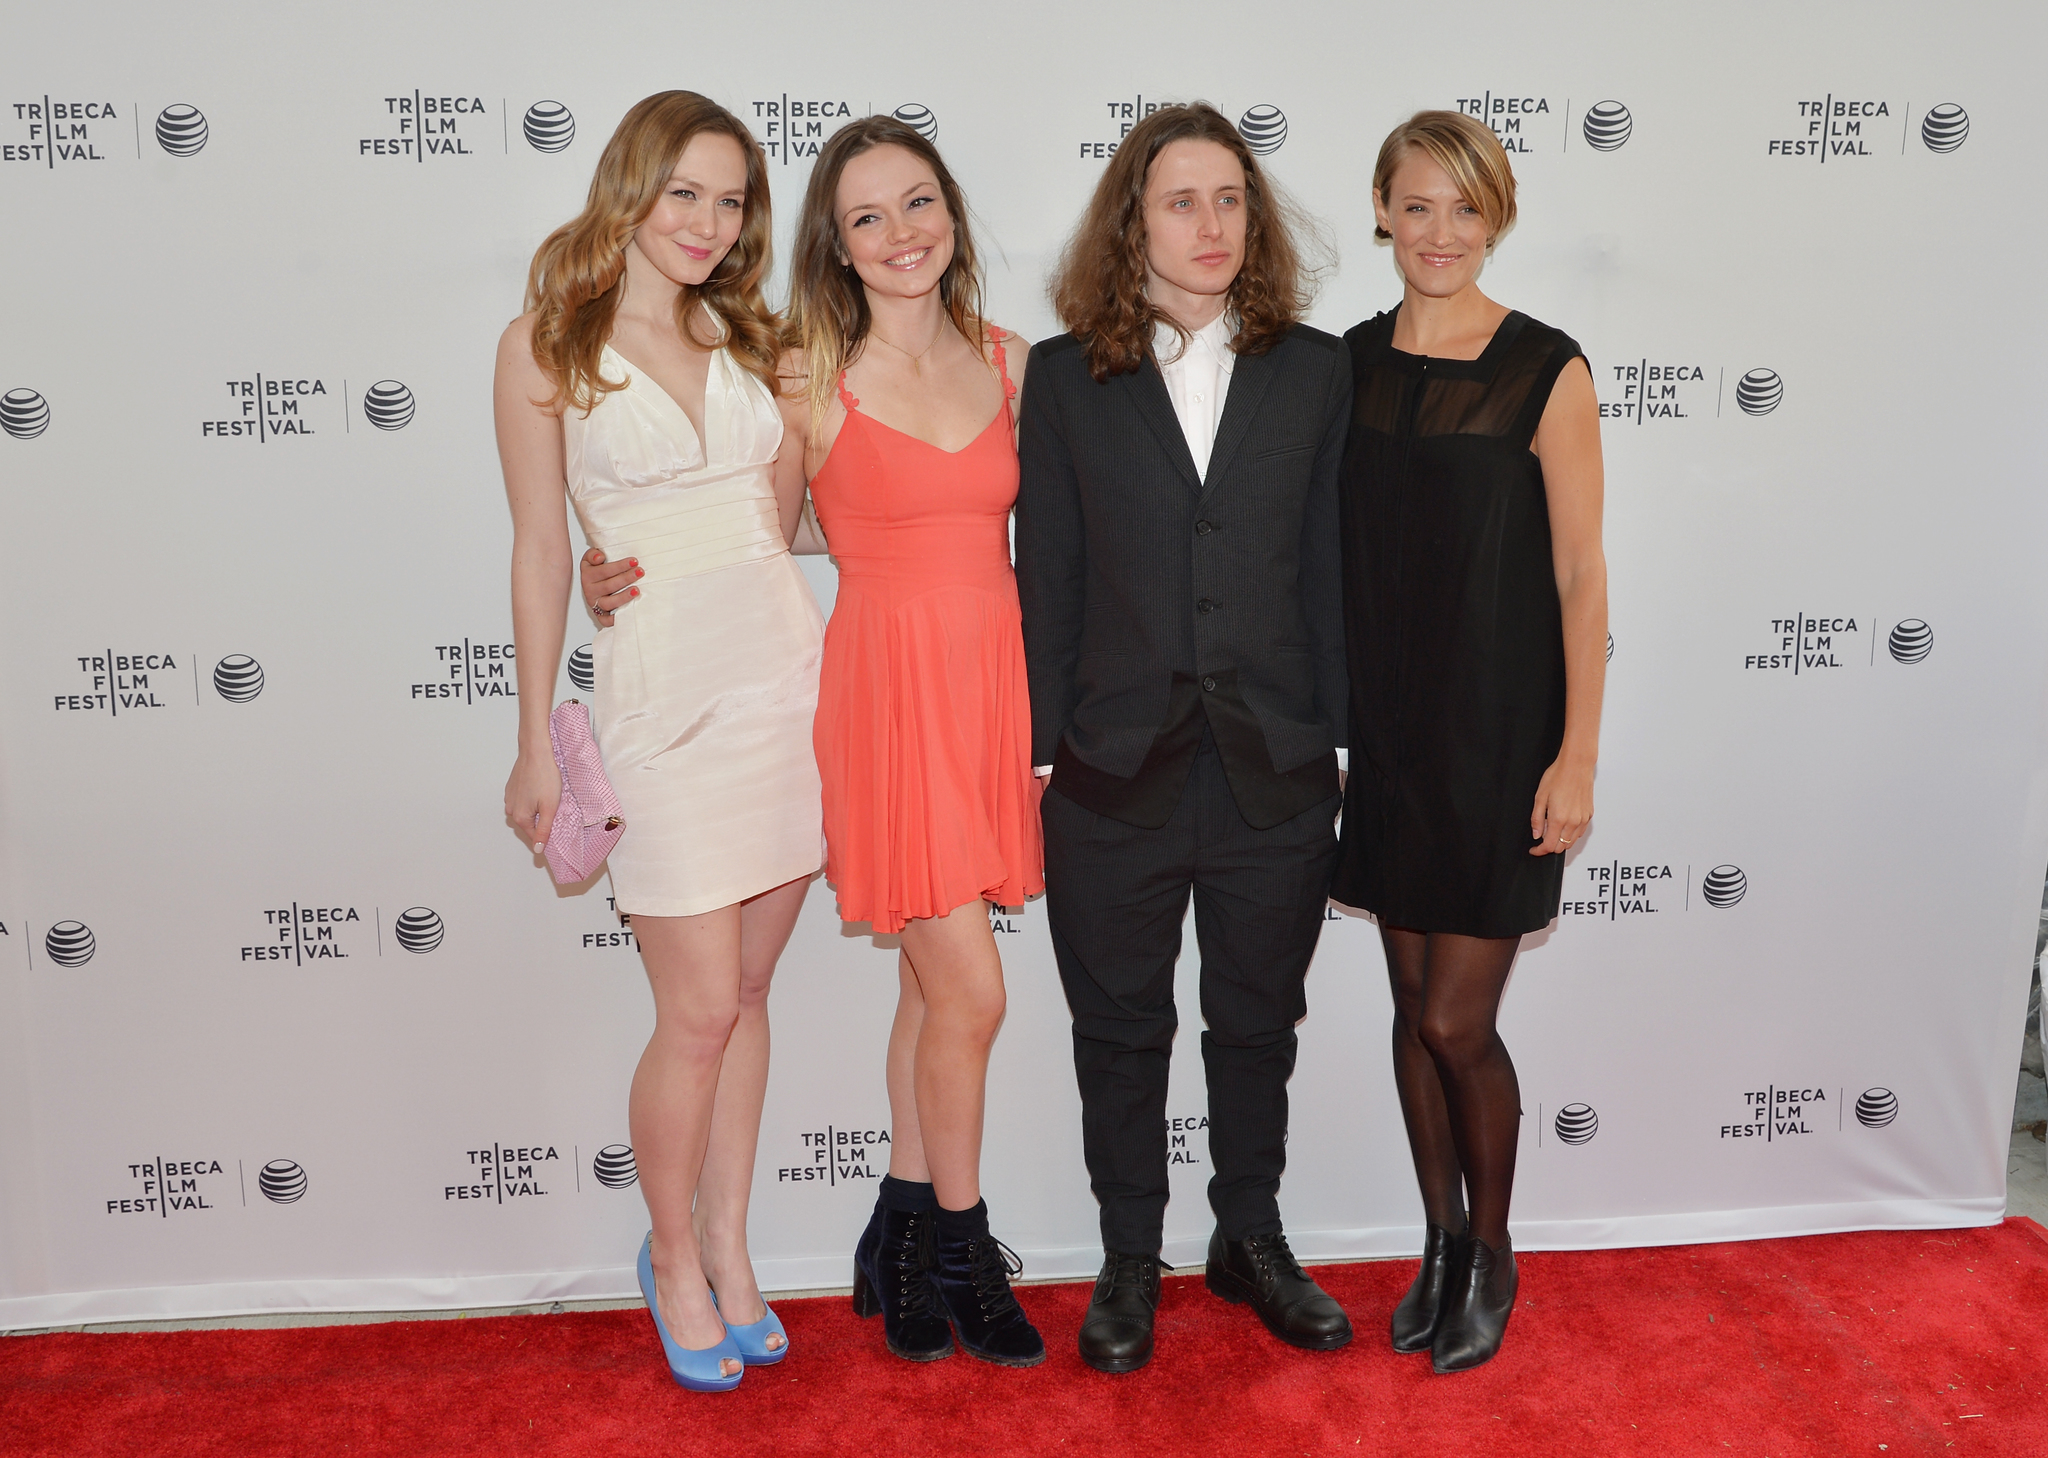 Rory Culkin, Emily Meade, Louisa Krause and Alexia Rasmussen